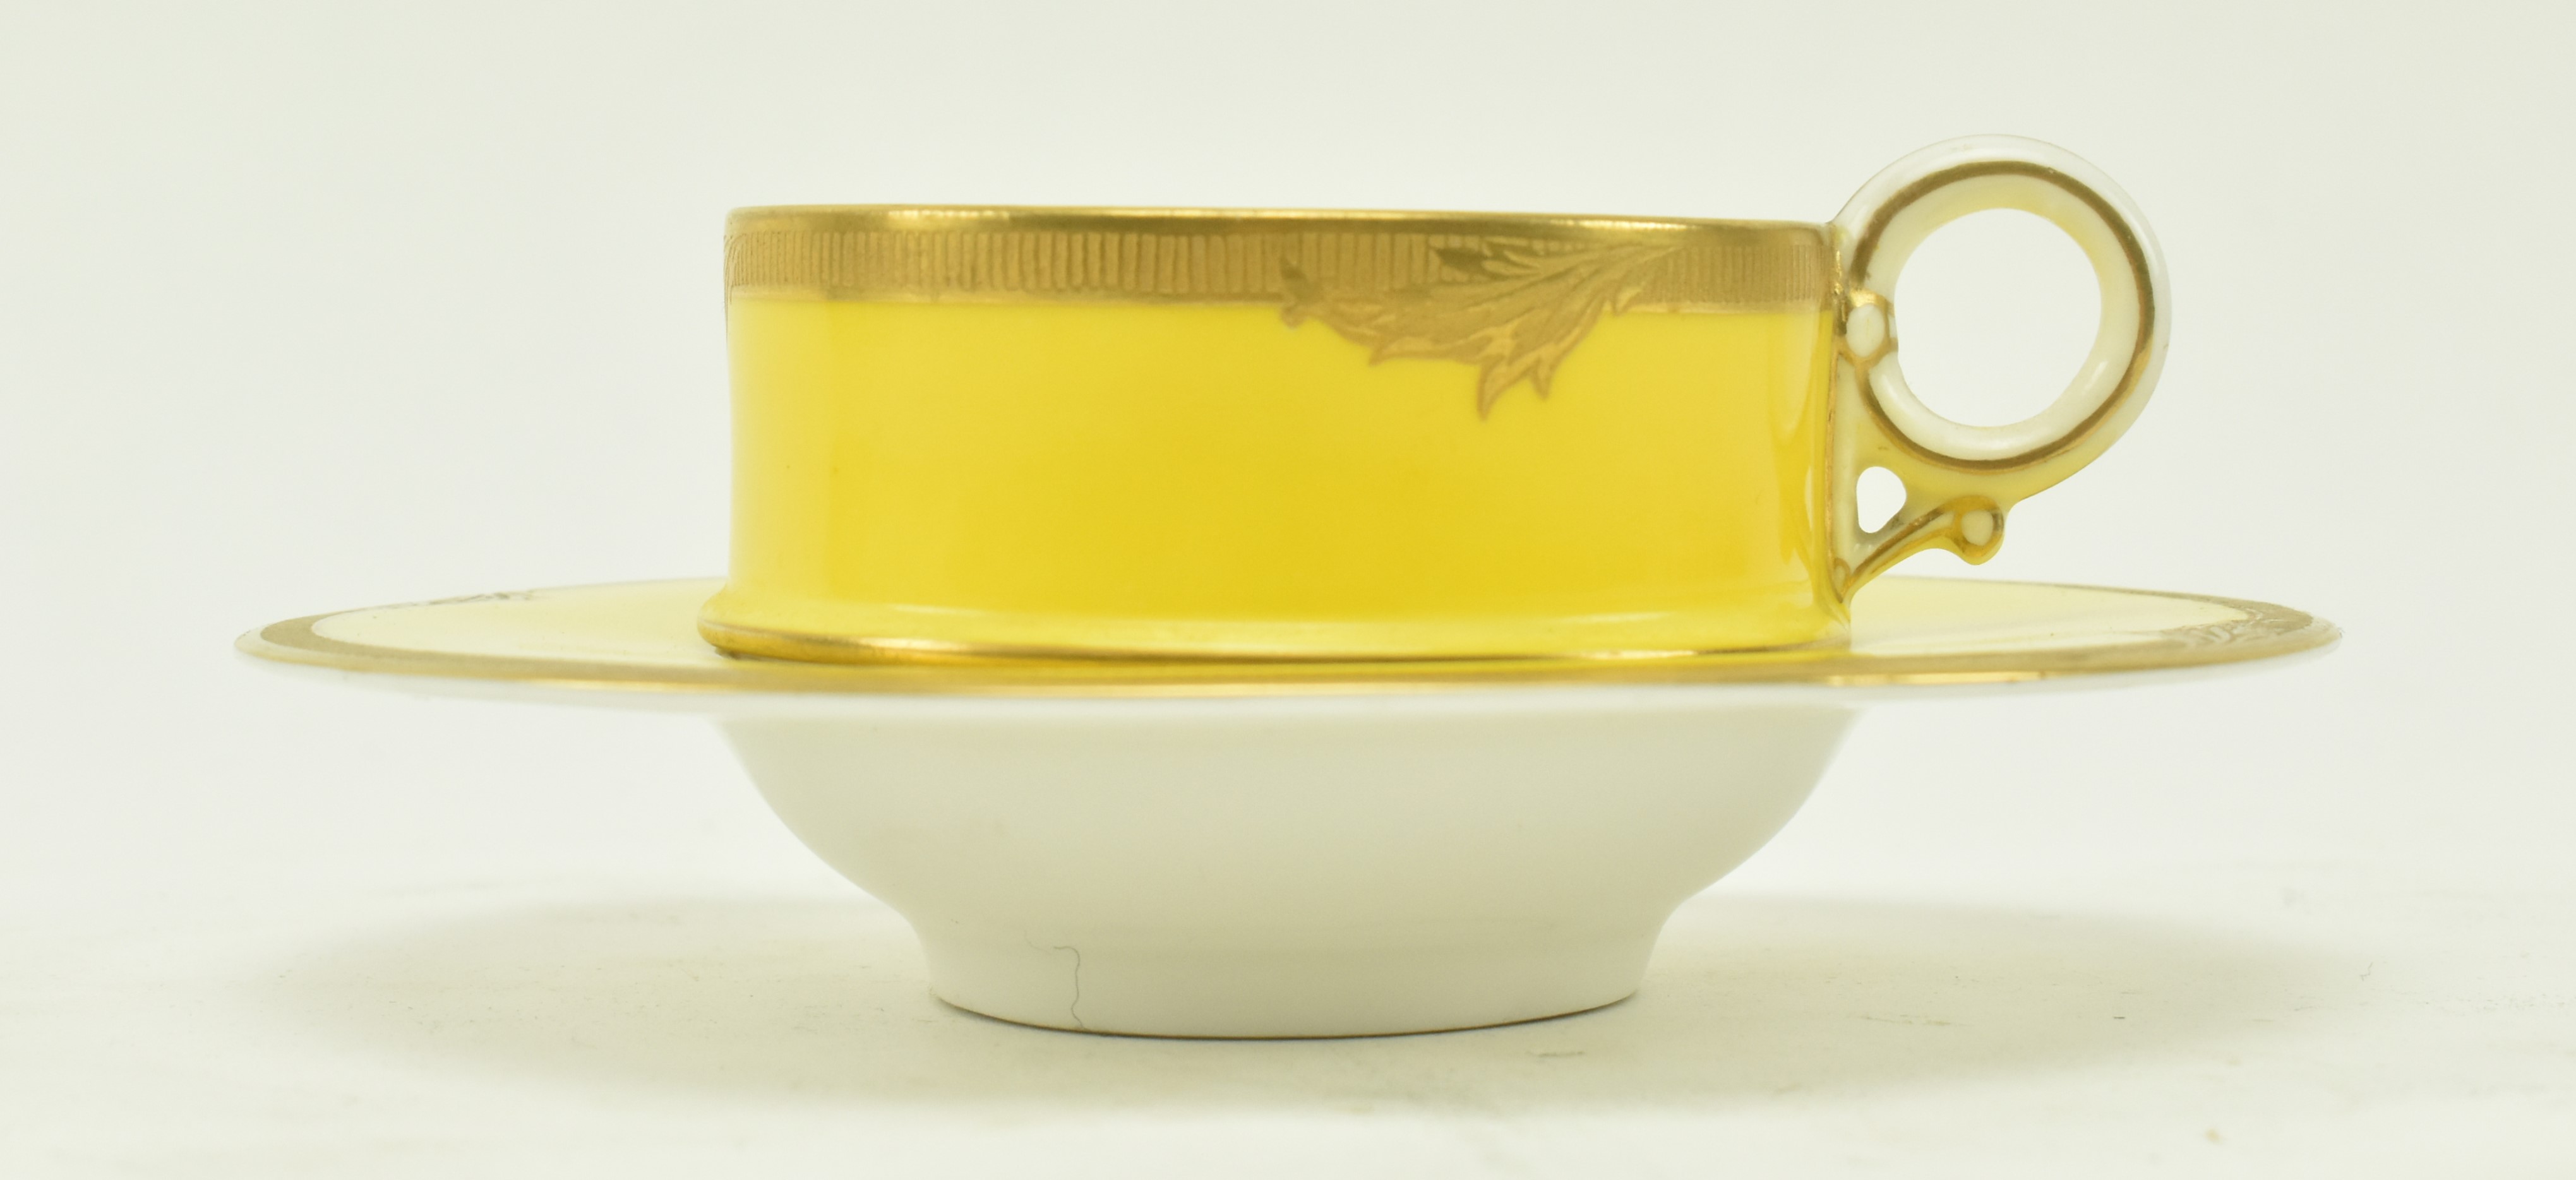 EARLY 20TH CENTURY ROYAL WORCESTER YELLOW TEACUP & SAUCER - Image 4 of 7